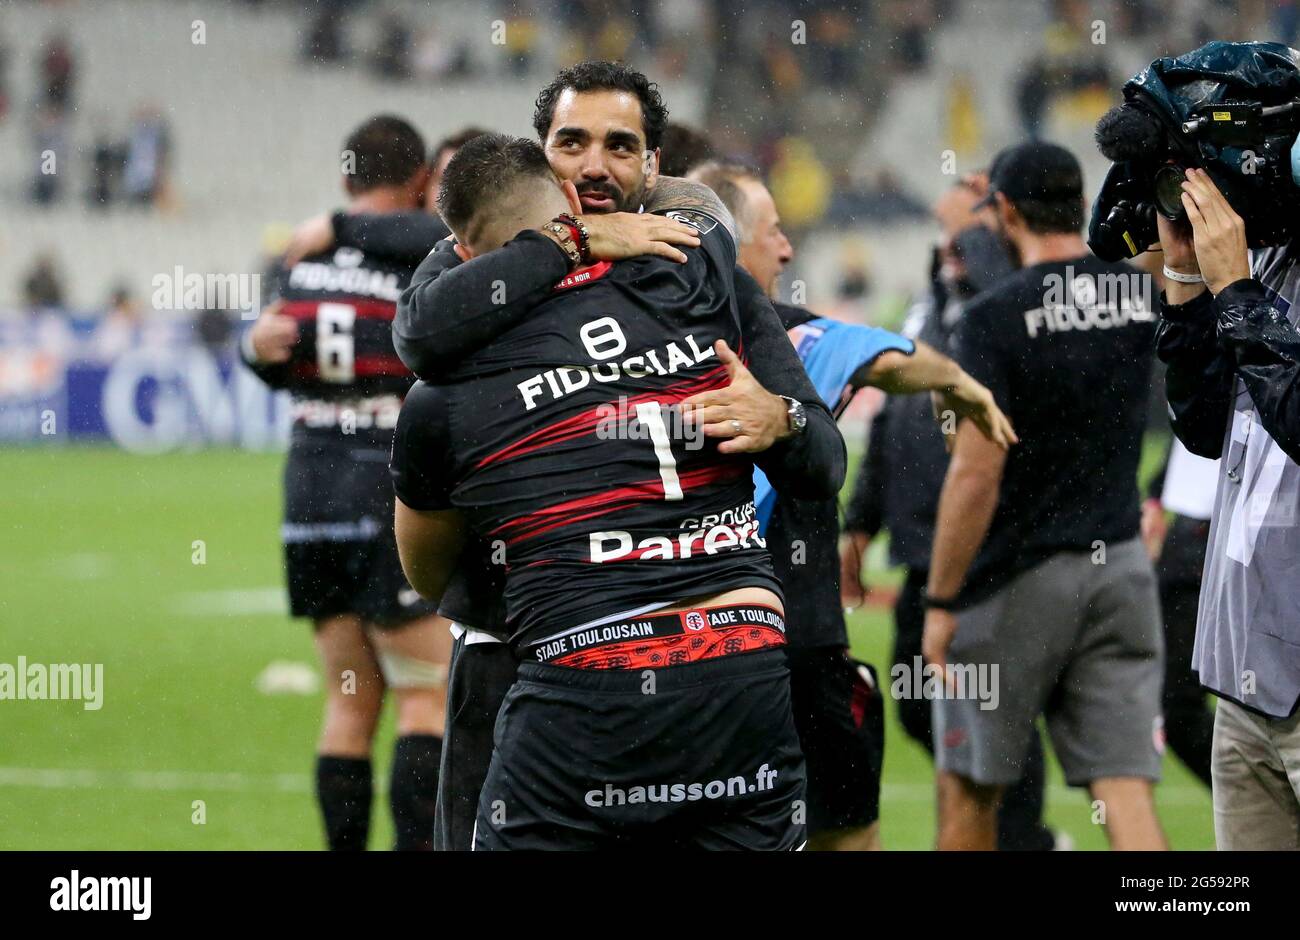 Paris, France. 25th June, 2021. Yoann Huget of Stade Toulousain hugs  teammate Cyril Baille to celebrate the victory following the French rugby  championship Top 14 Final between Stade Toulousain (Toulouse) and Stade